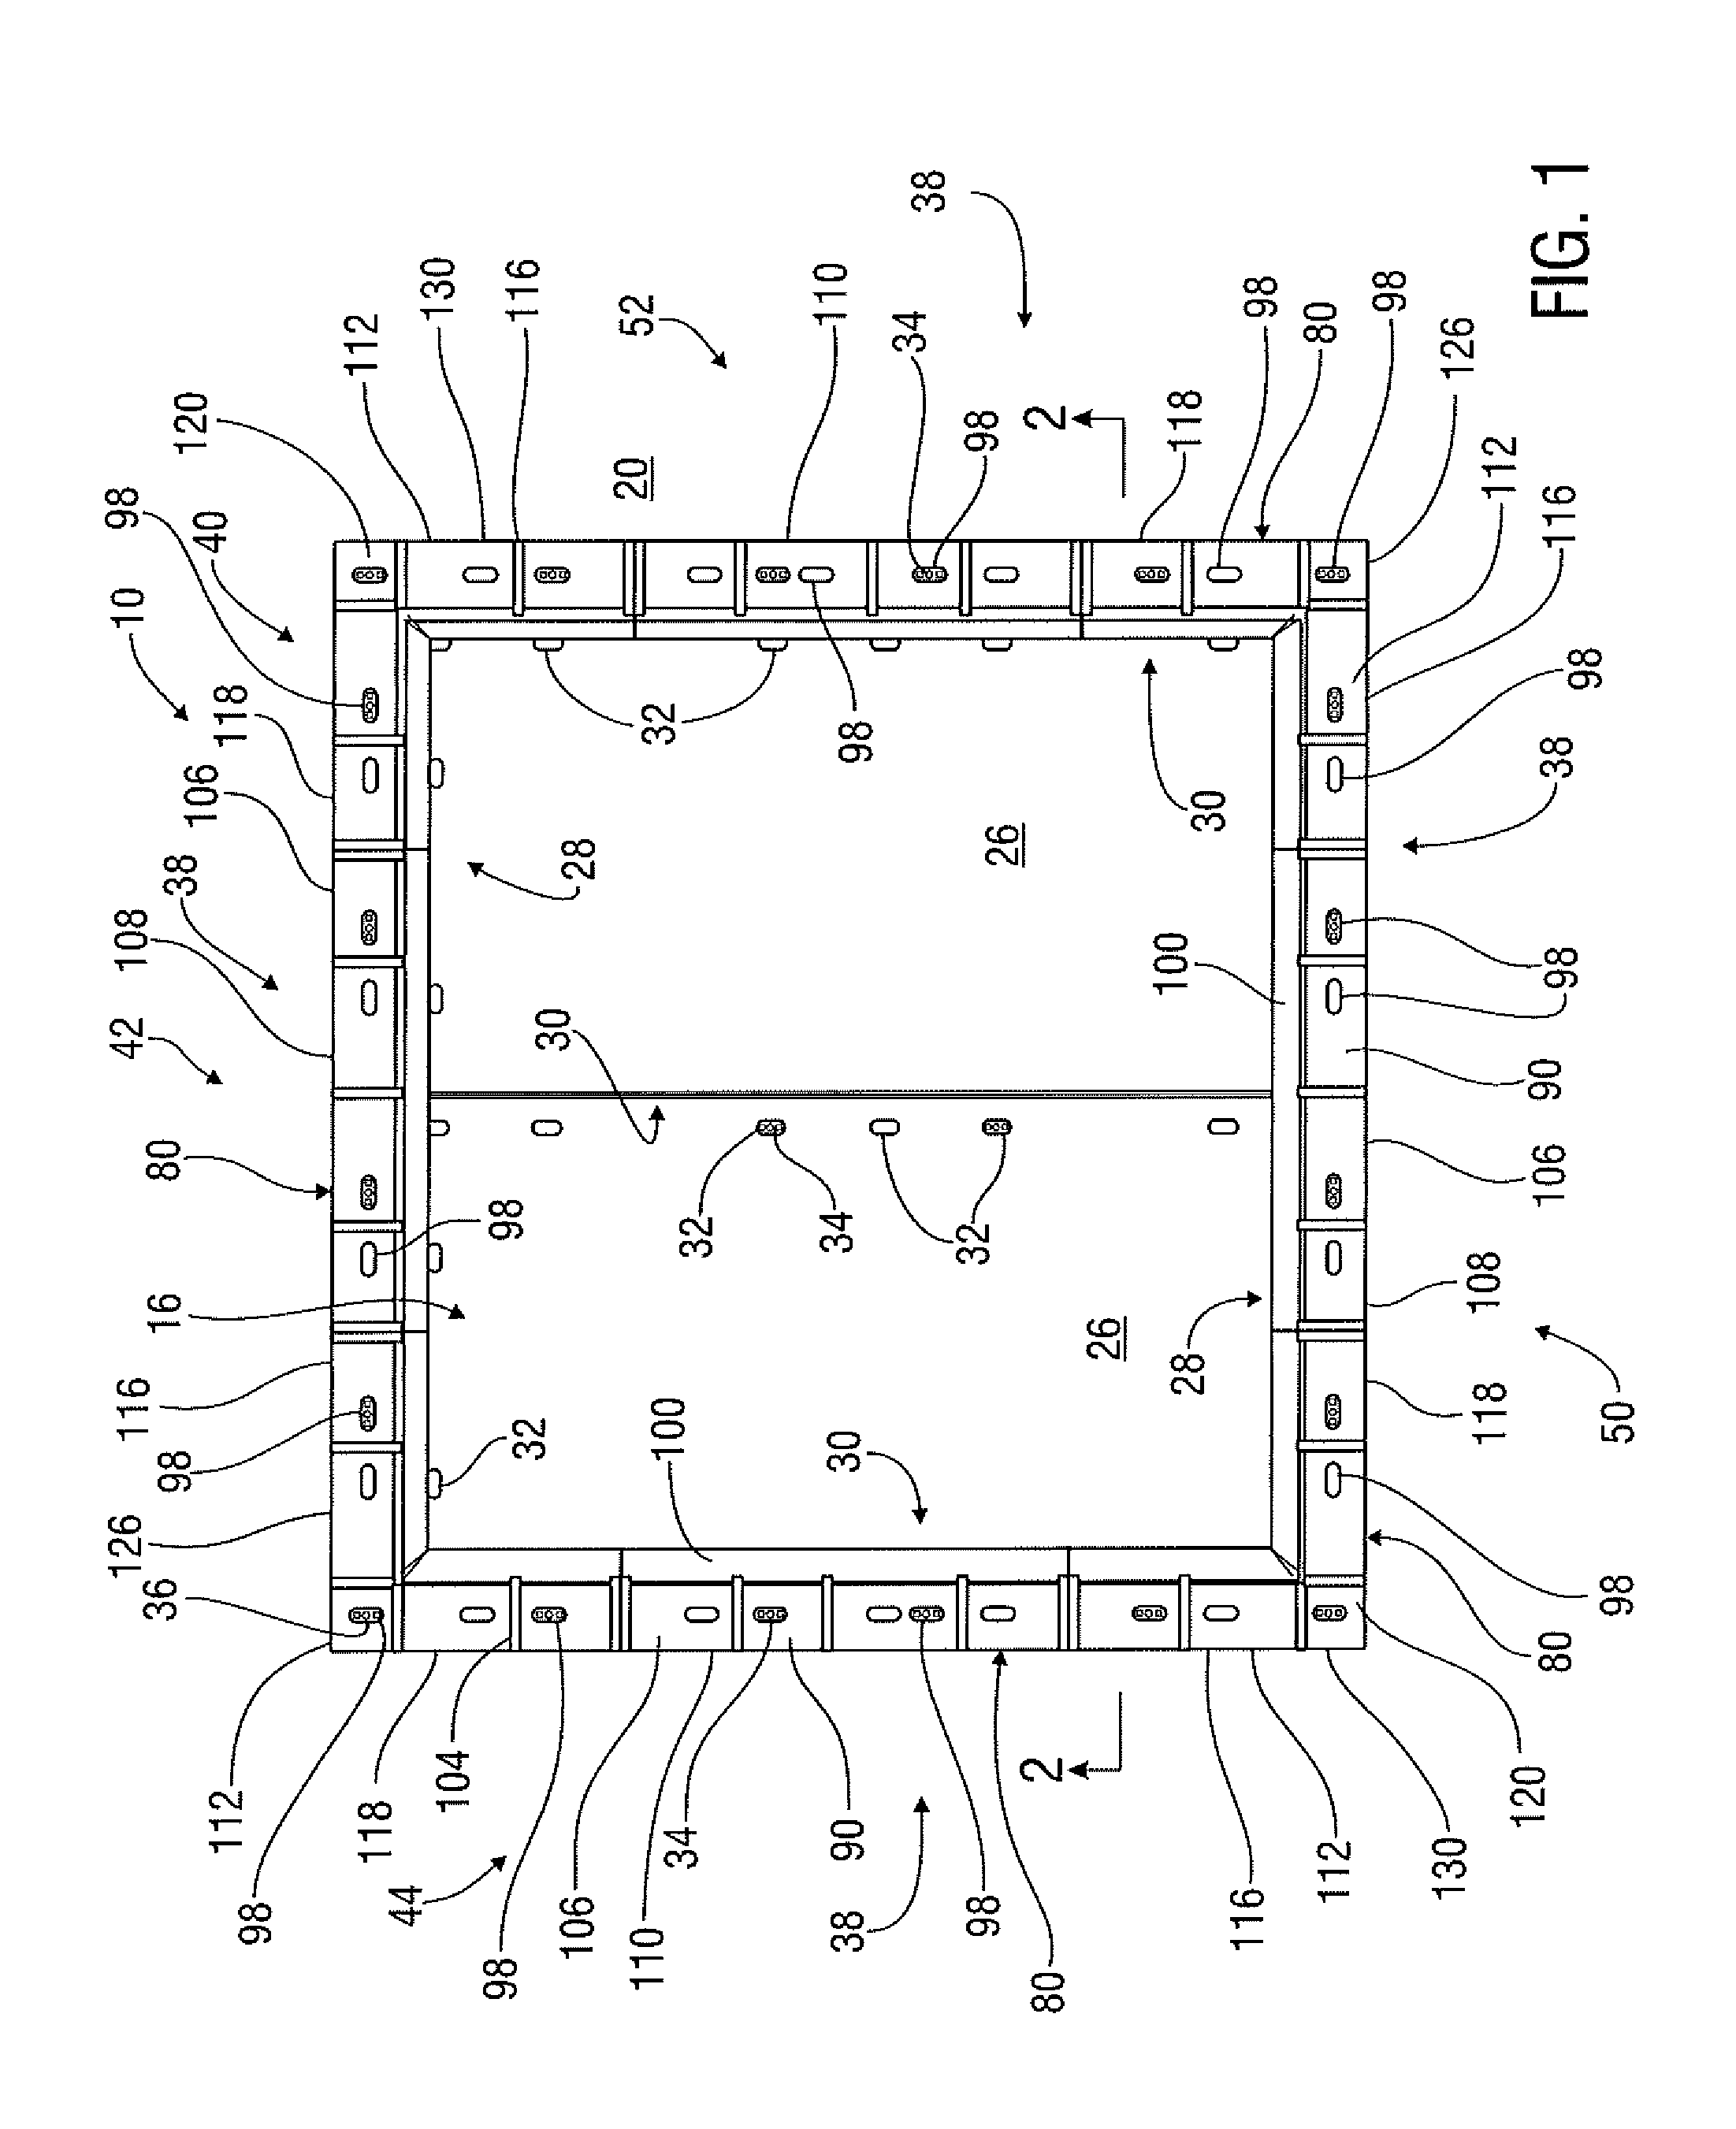 Liquid Containment System for Use With Load-Supporting Surfaces